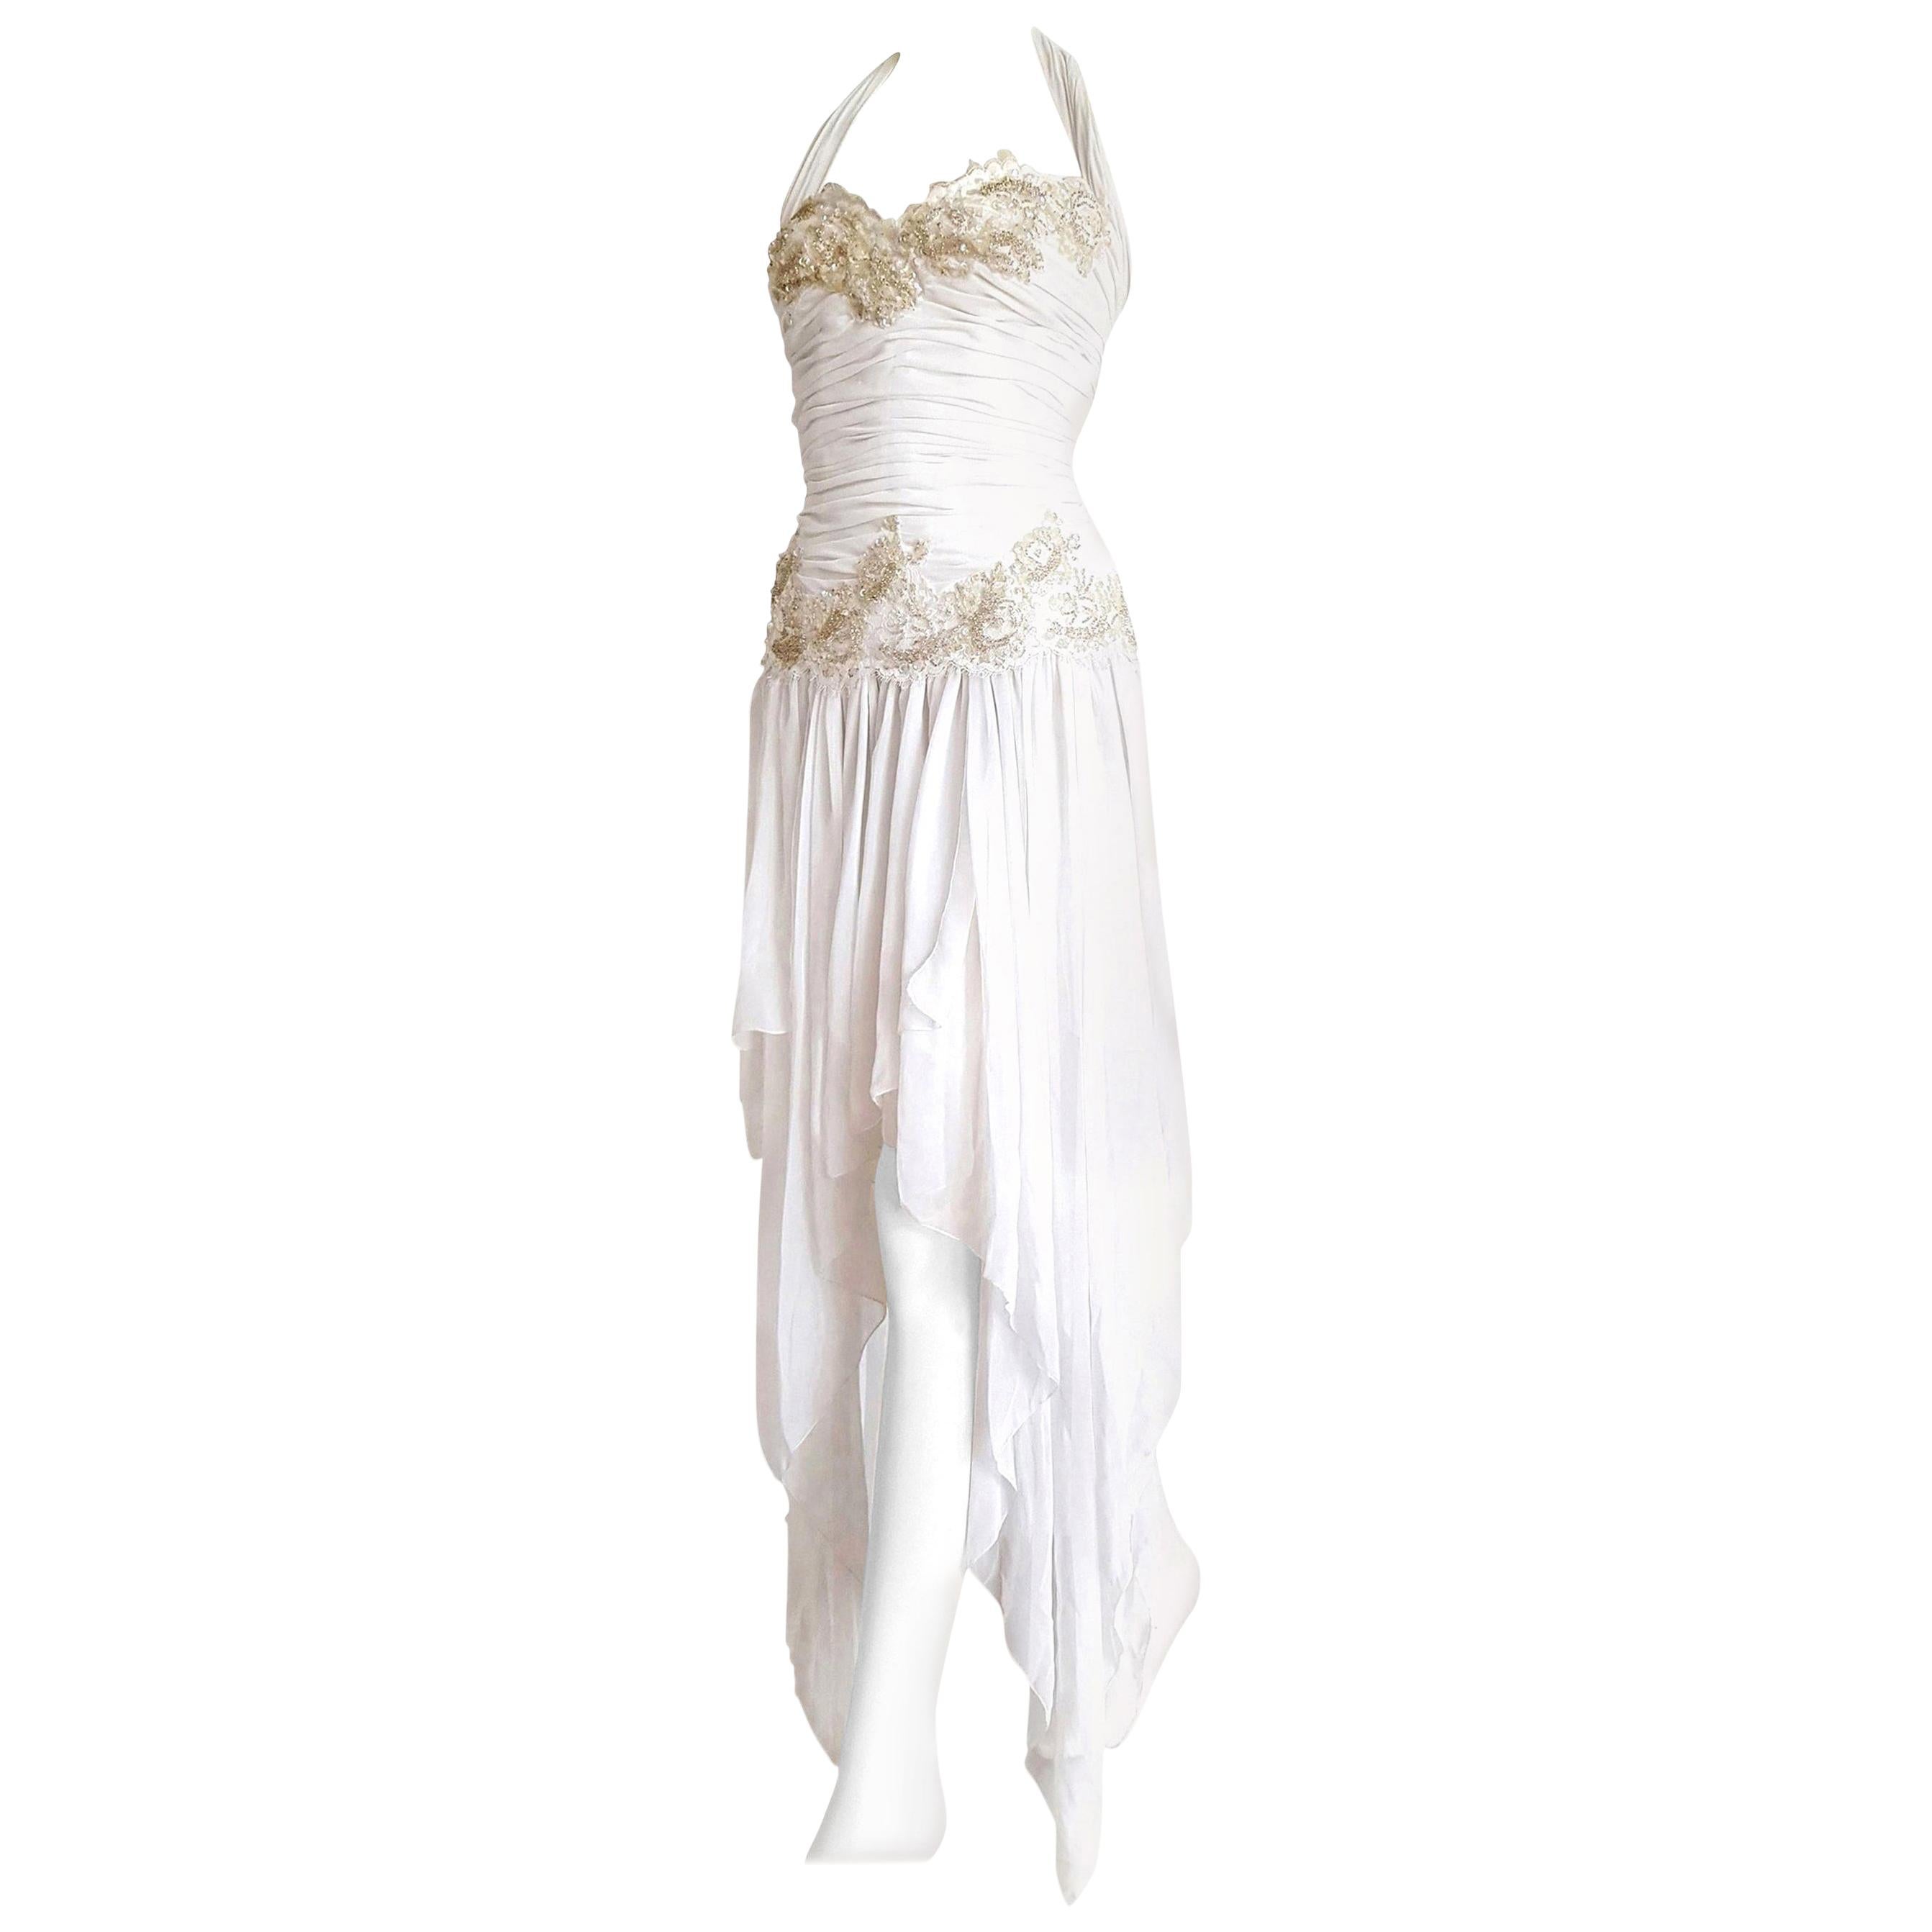 Isabelle ALLARD Paris Couture chiffon irregular hem skirt, sequins, embroidery, sleeveless silk and cotton white dress - Created in his atelier on Rue Saint-Honoré, Paris - Unworn, New.

Isabelle ALLARD is a Paris brand that created only haute